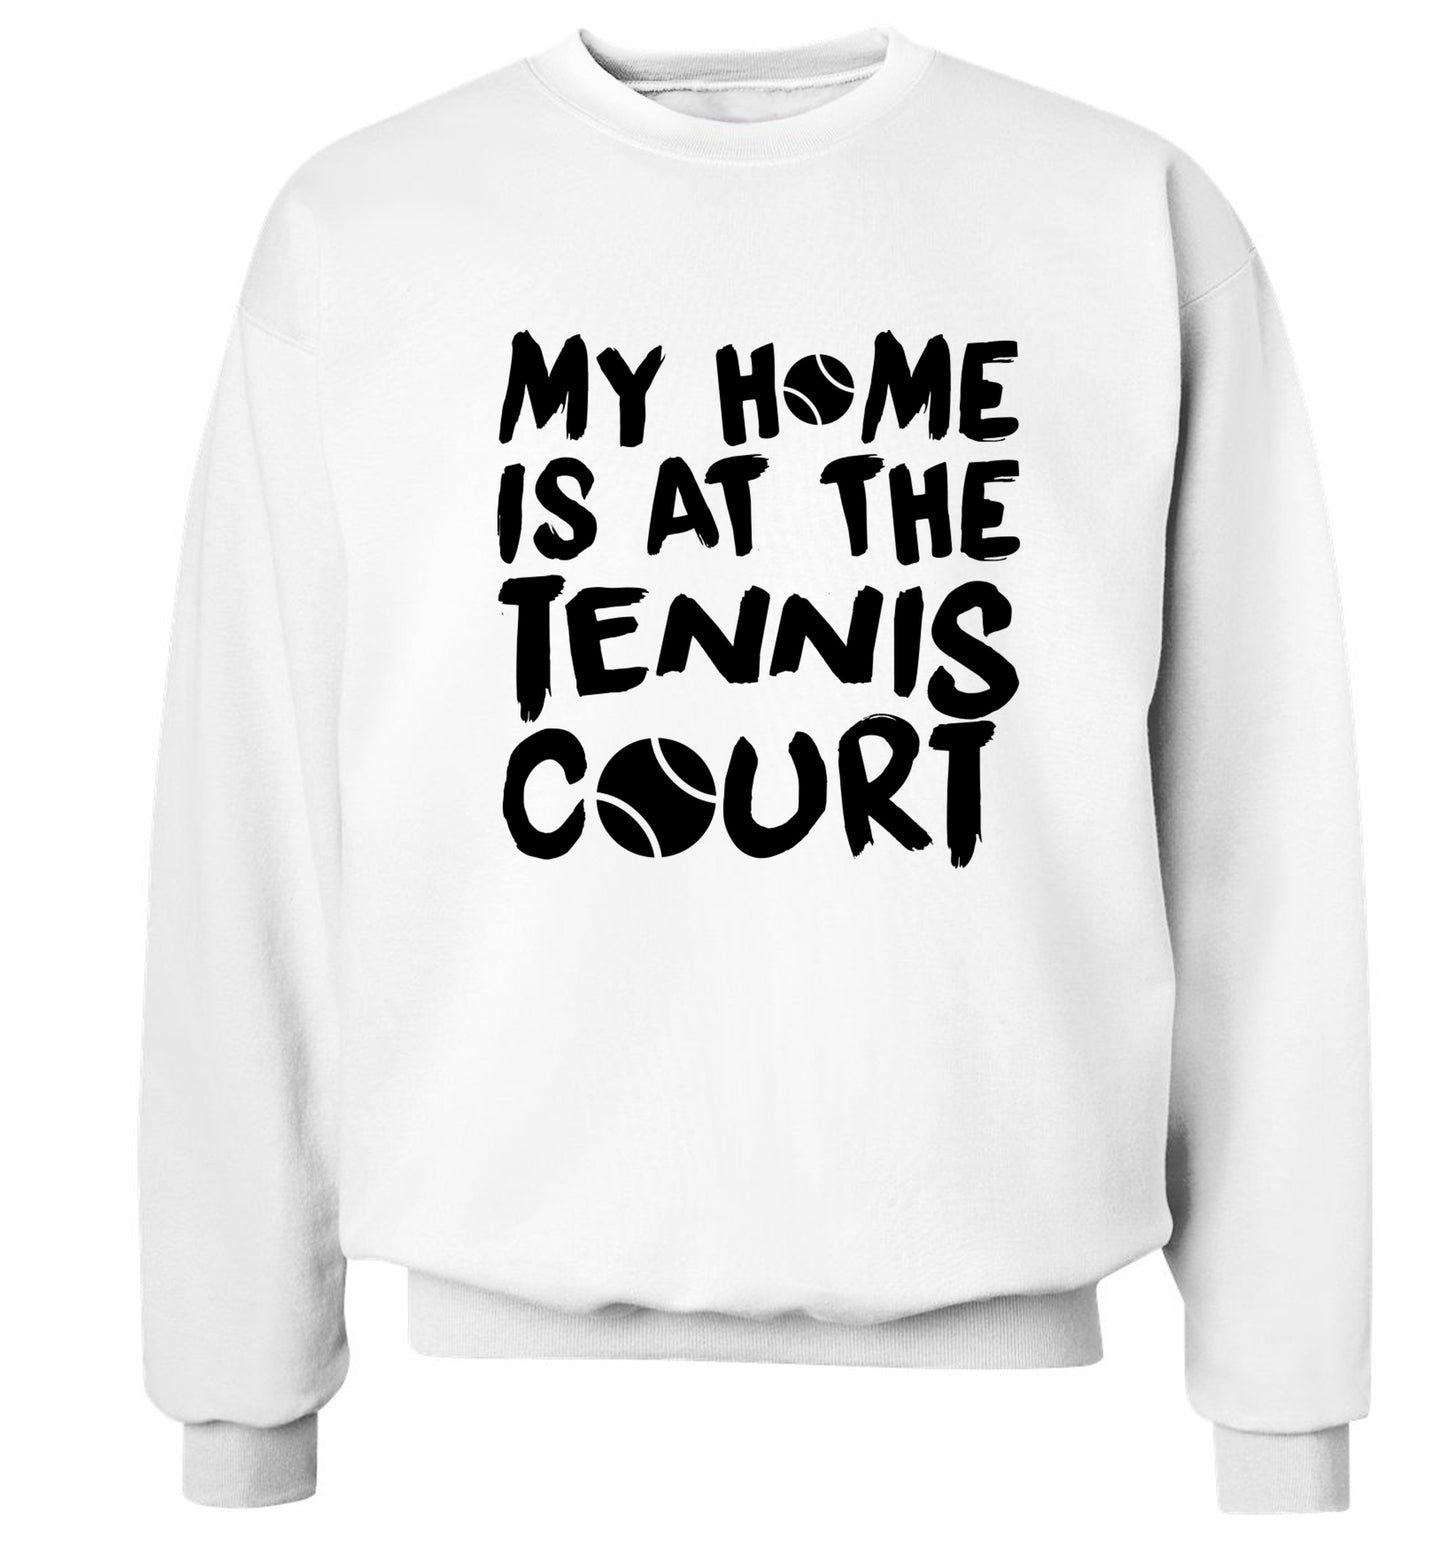 My home is at the tennis court Adult's unisex white Sweater 2XL